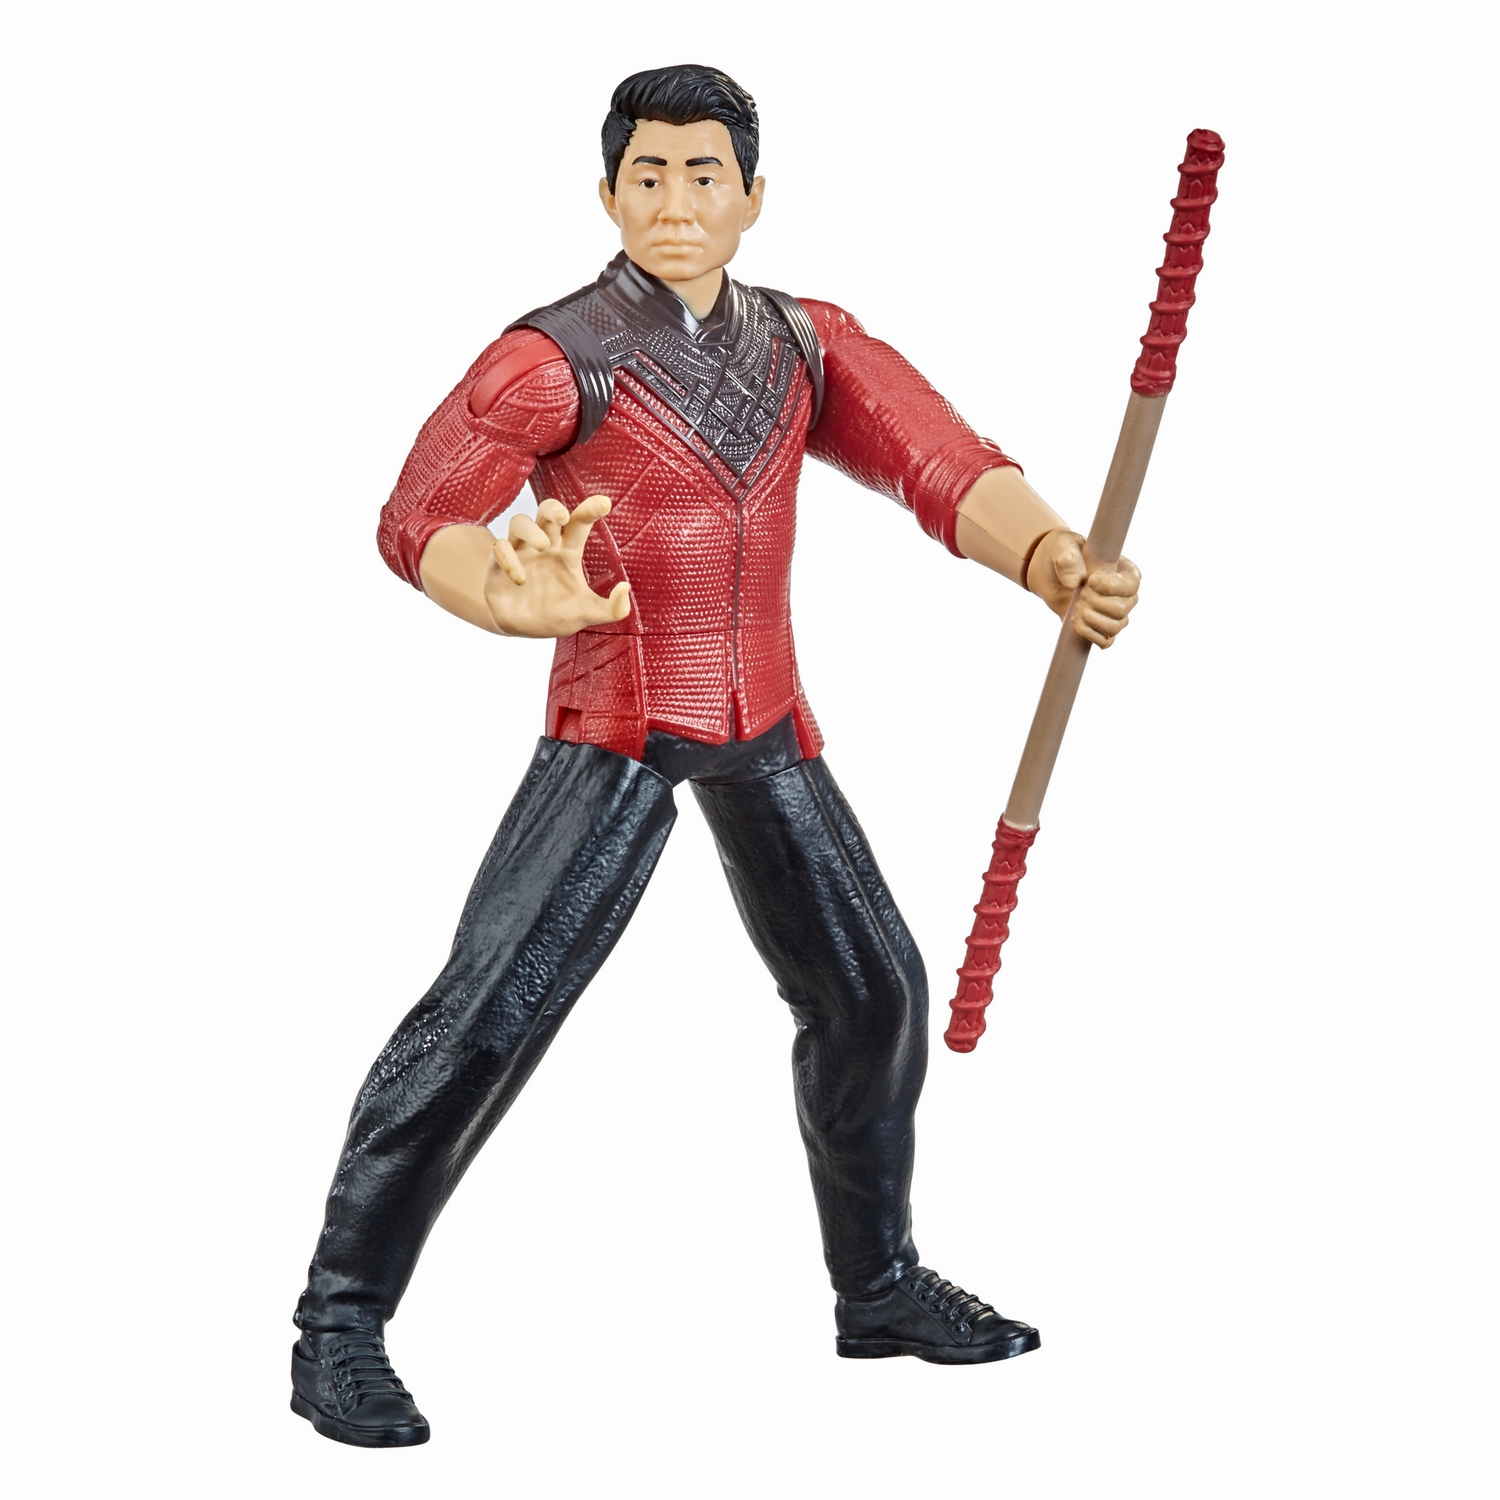 MARVEL SHANG-CHI AND THE LEGEND OF THE TEN RINGS 6-INCH SHANG-CHI Figure - oop (1).jpg